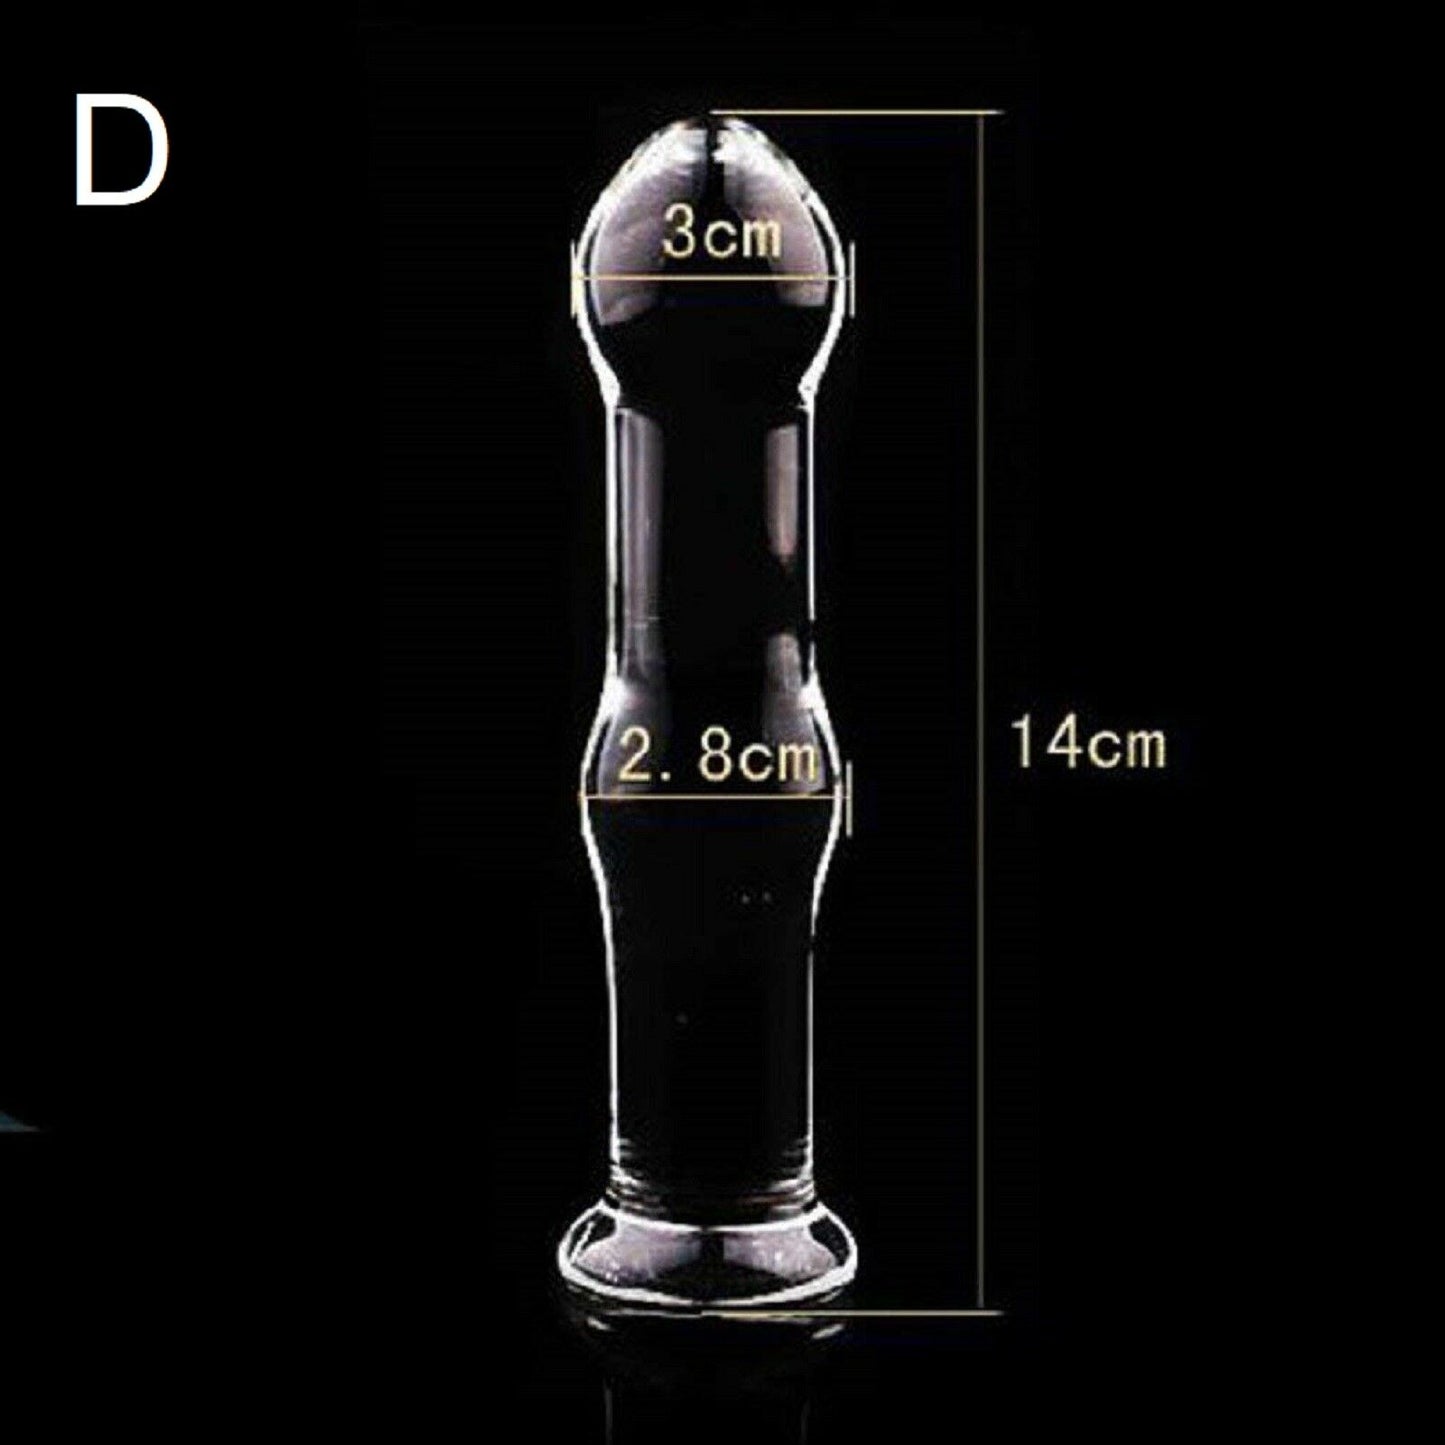 Glass Anal Butt Plug Anal Beads Trainer Dildo Prostate Massager Gay Sex Toy NEW